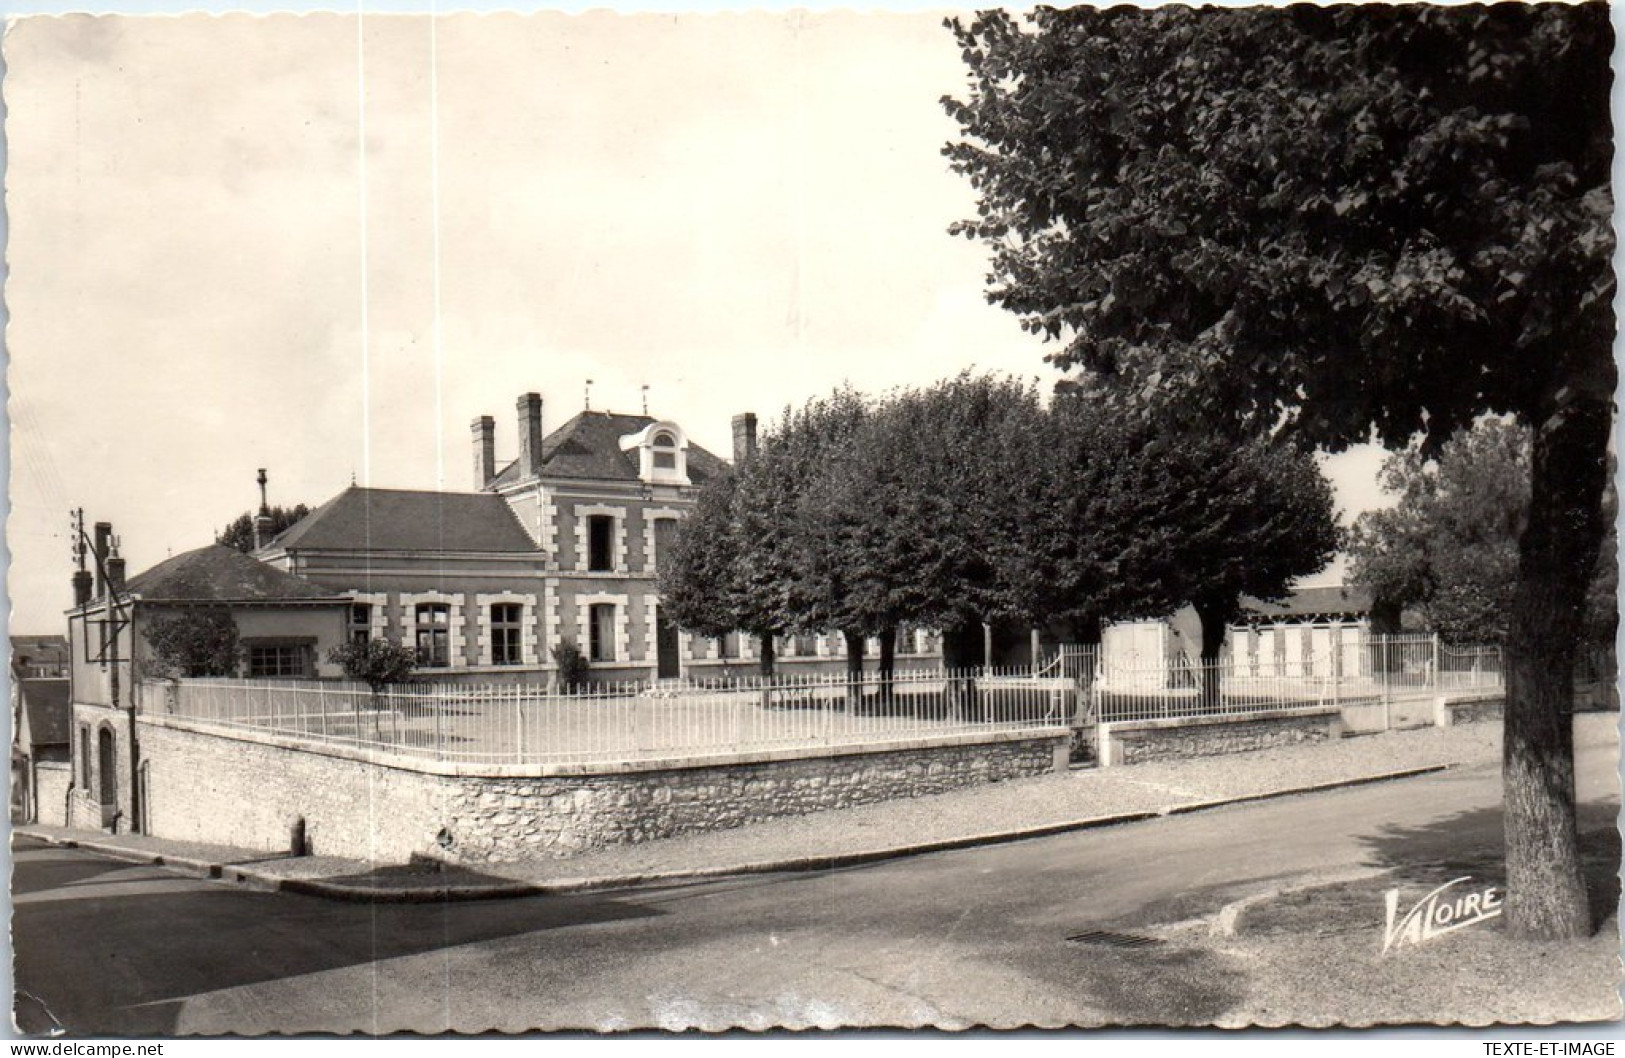 41 SELOMMES - L'ecole. - Selommes